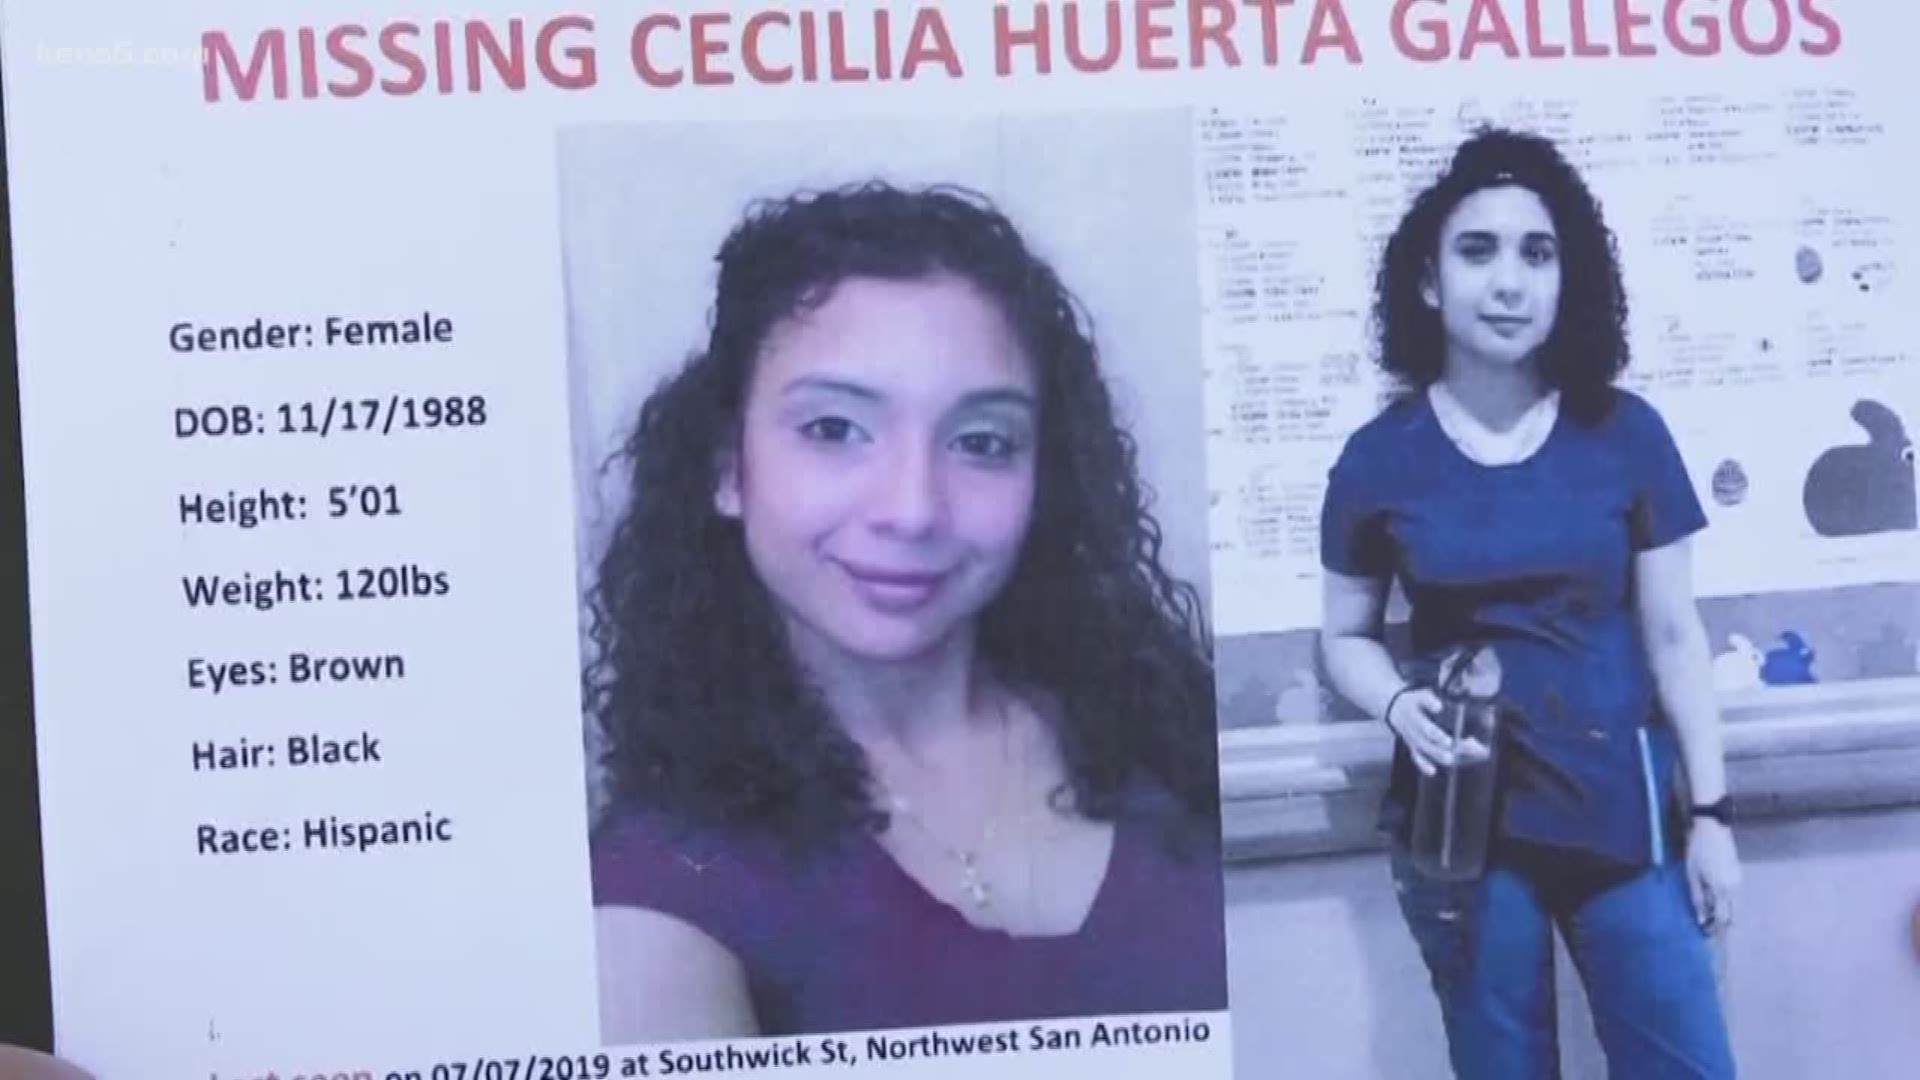 Her sister said she's worried this case will go cold if police can't find the body of Cecilia Huerta Gallegos. The family thinks one man has the answer. Her husband is being held in the Bexar County Jail without bond.